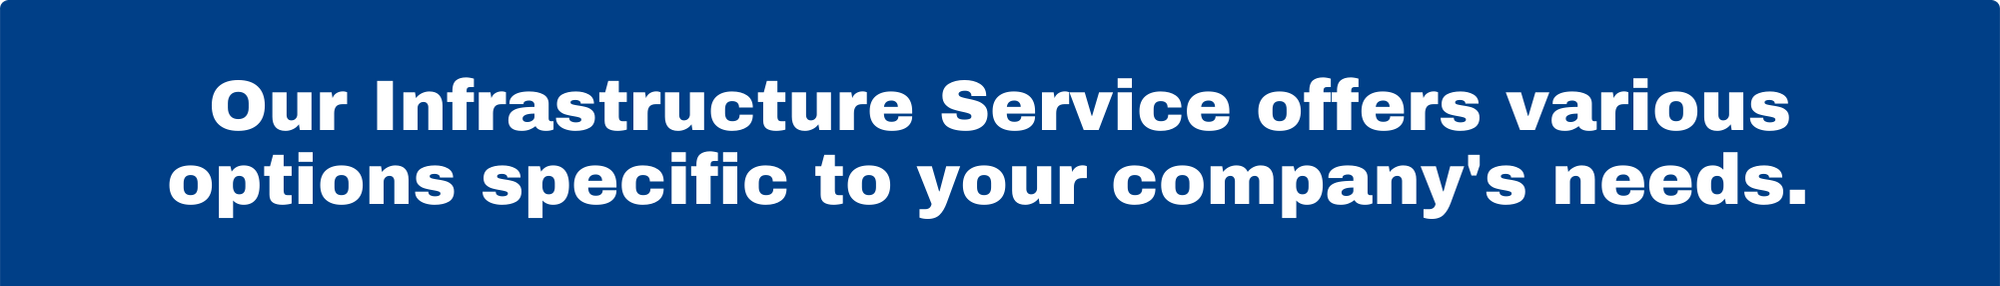 Our service offers standard and custom options